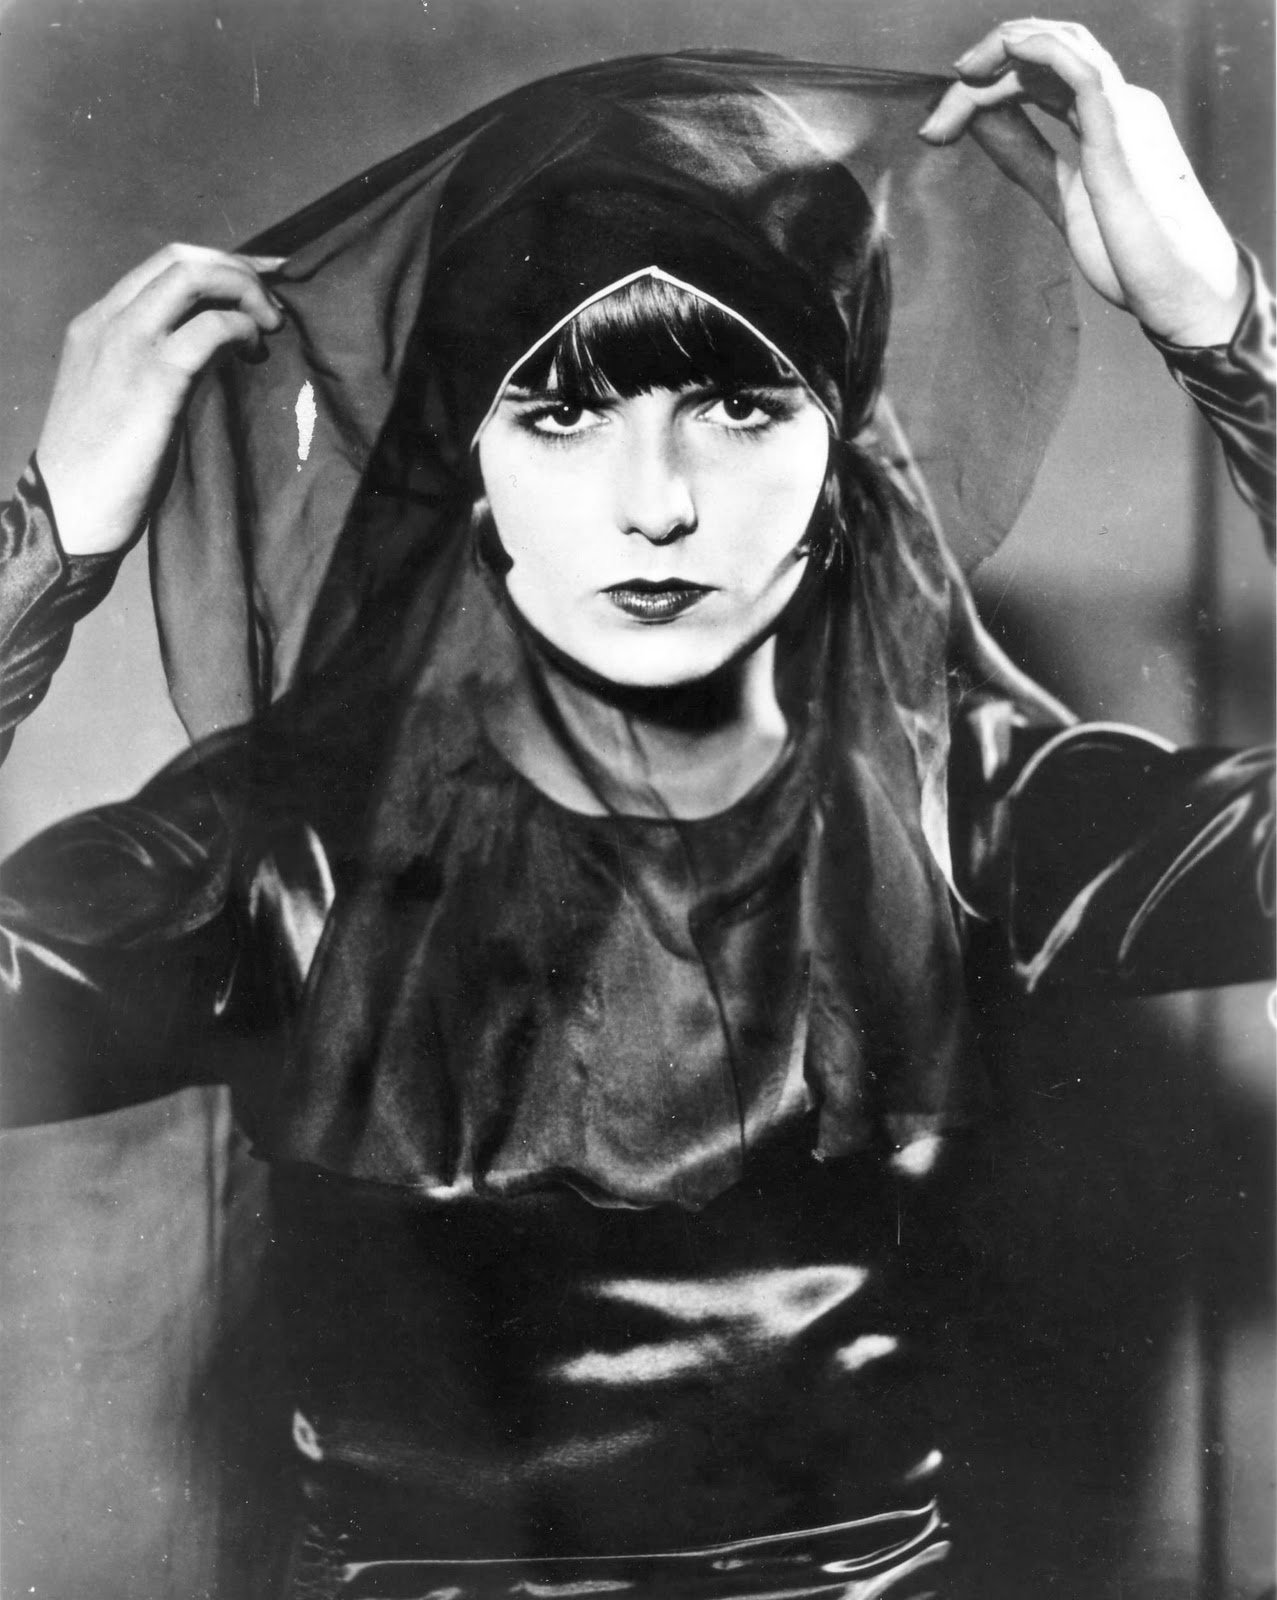 Repentance Clam headache Niles Film Museum on Twitter: "Sat. Mar. 23, 7:30PM PANDORA'S BOX (1929)  Louise Brooks stars in this classic film of a young woman who destroys the  lives of everyone close to her.